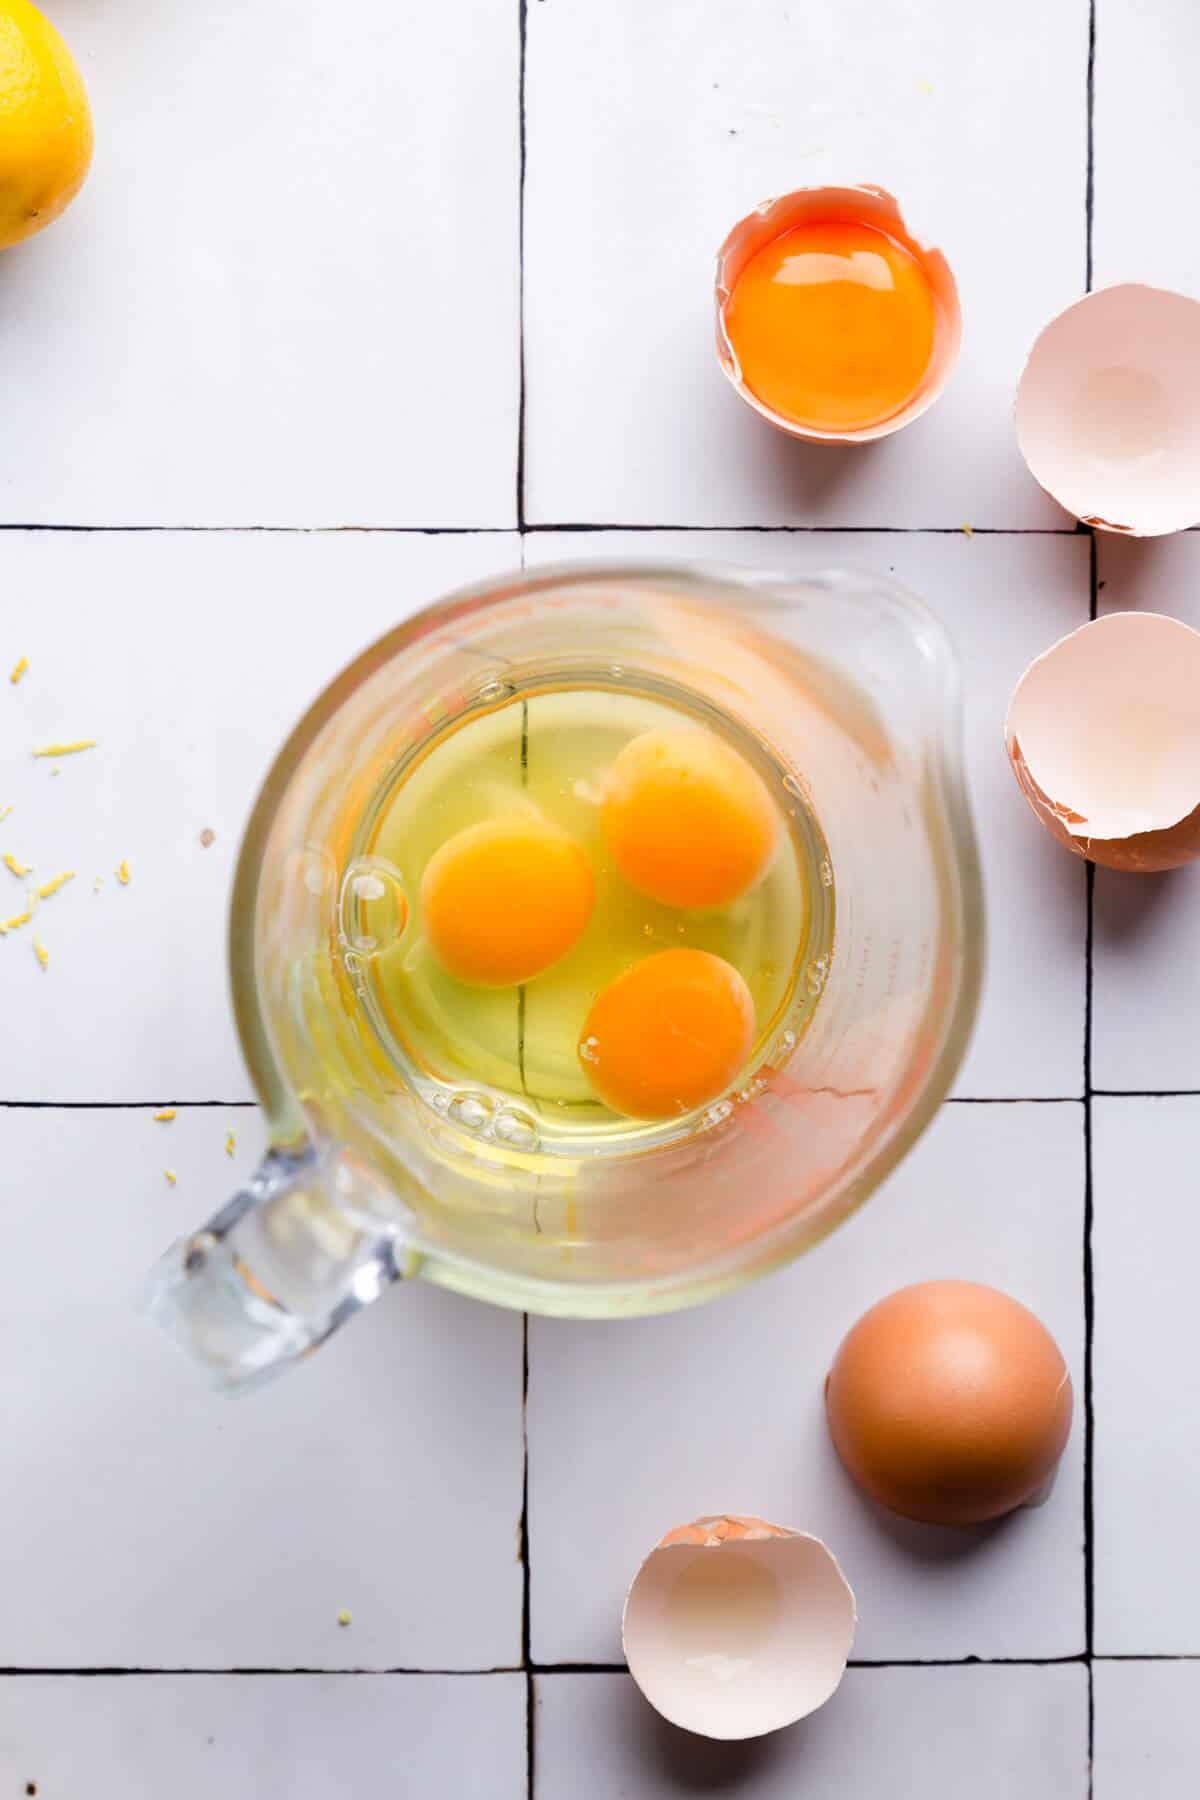 overhead shot of a glass jar filled with 3 eggs and an egg yolk on side